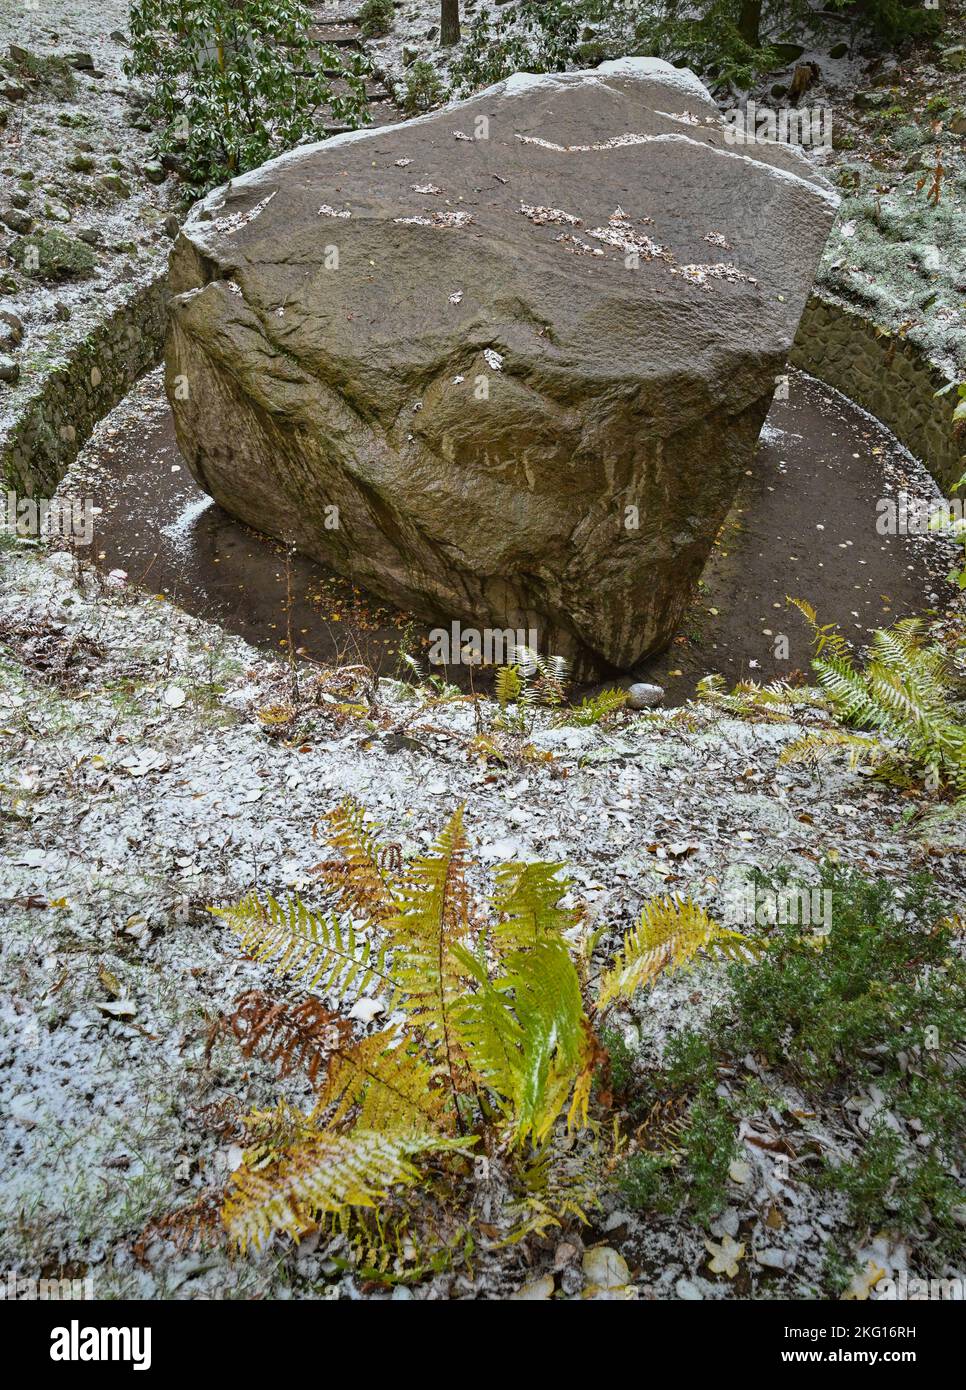 Kobbeln, Germany. 18th Nov, 2022. A little snow lies on the boulder 'Kobbelner Stein'. In one of the smallest villages of Brandenburg, between Neuzelle and Beeskow, lies one of the largest stones in the country. It was discovered in 1921 and later uncovered. The erratic boulder made of hornblende-rich syenite granite is a remnant from the last ice age and comes from the Baltic Sea island of Bornholm. Measuring 7.30 meters long, 5.25 meters wide and 4.52 meters high, the stone weighs 256 tons. Credit: Patrick Pleul/dpa/Alamy Live News Stock Photo